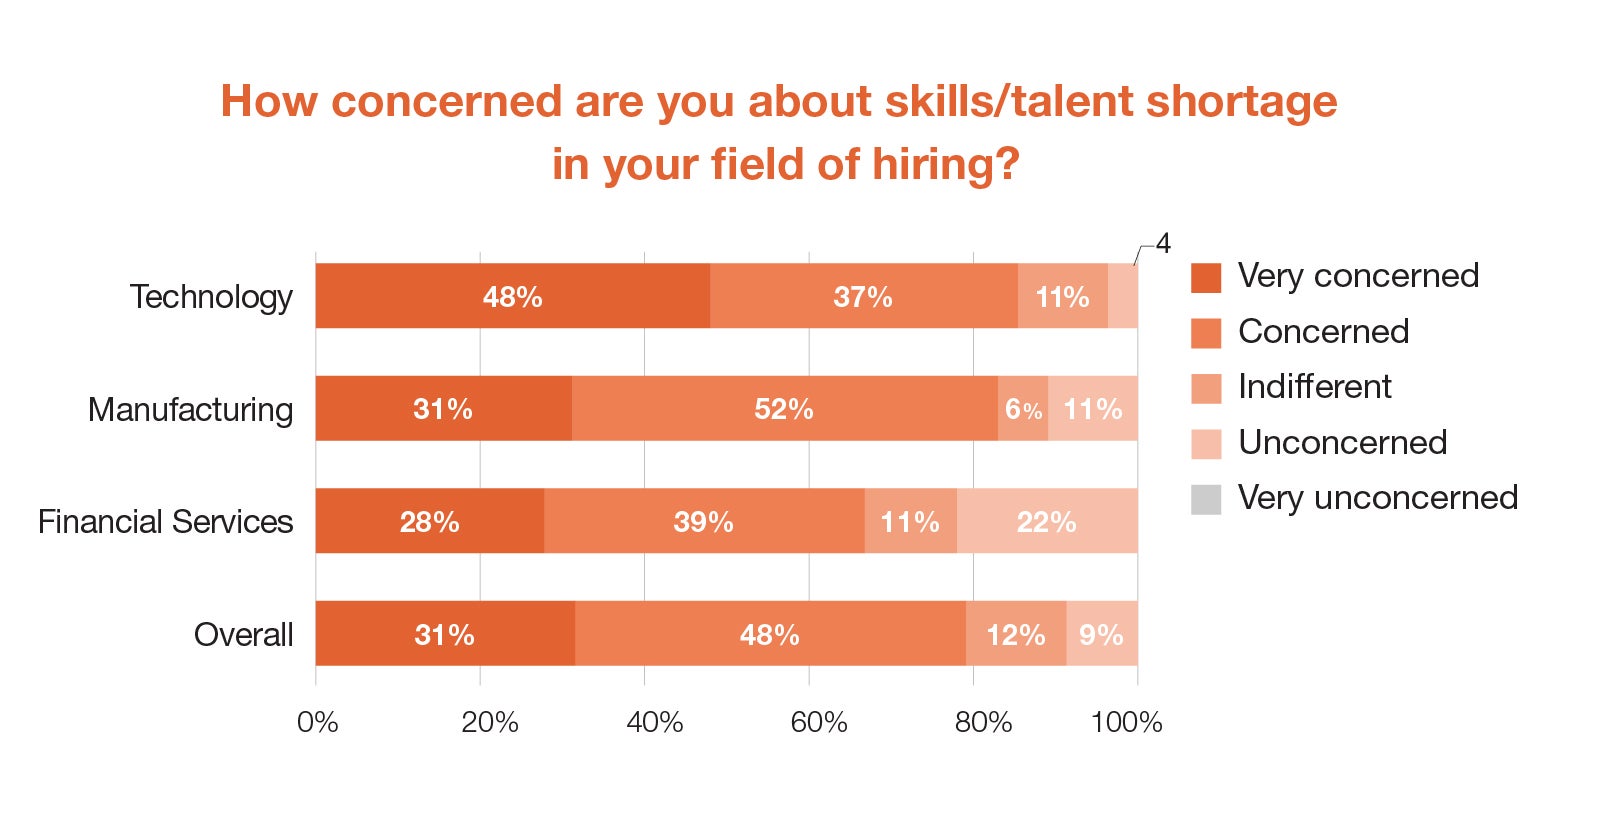 How concerned are you about skills / talent shortage in your field of hiring?